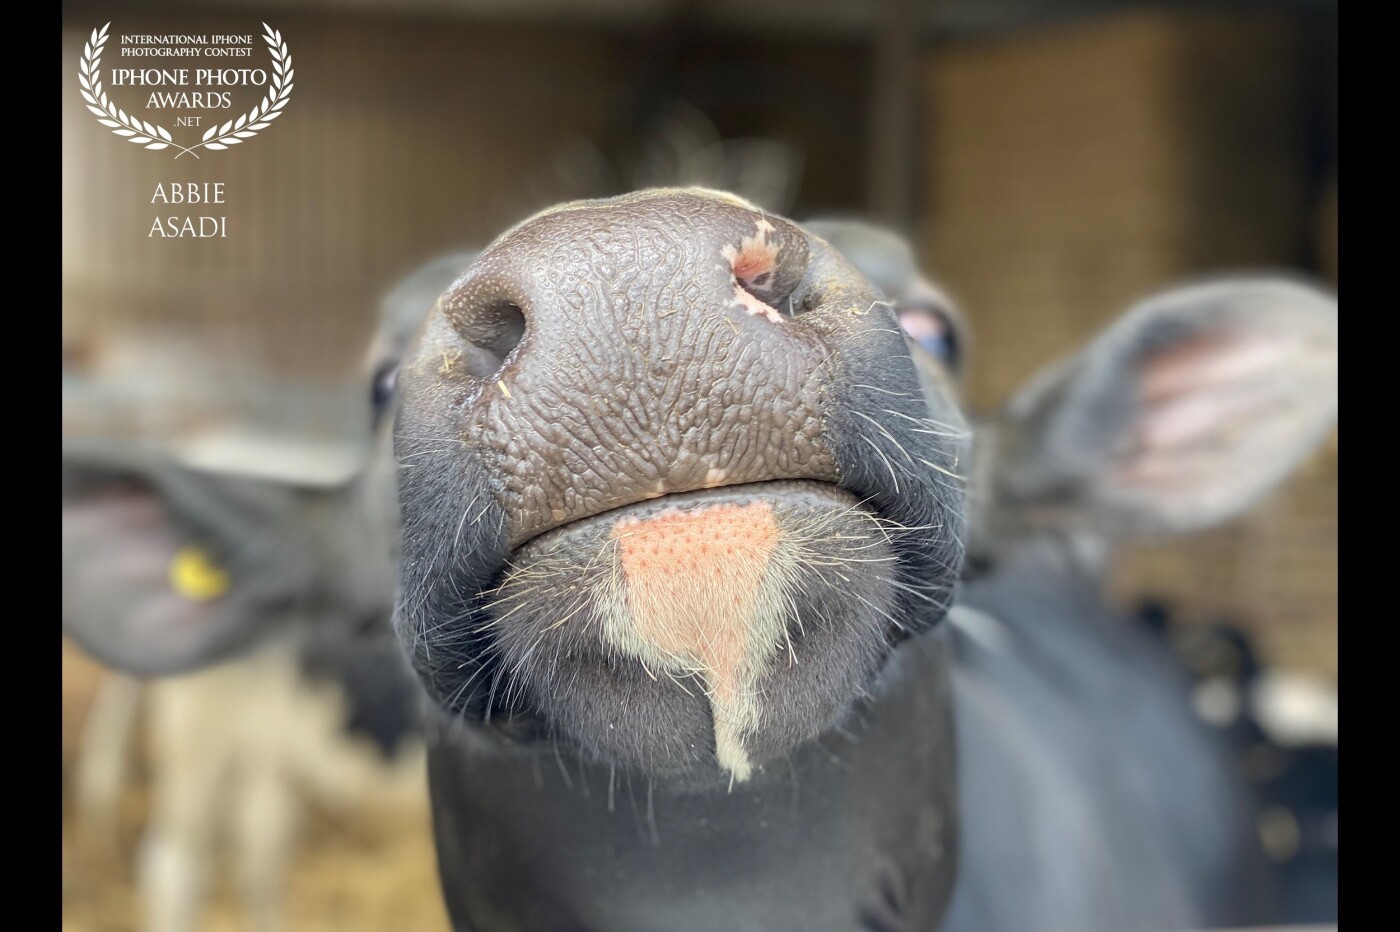 This friendly chap couldn't resist the camera whilst we were having a discussion with my children about where our food comes from. Love the detail shown in the cow's face. 